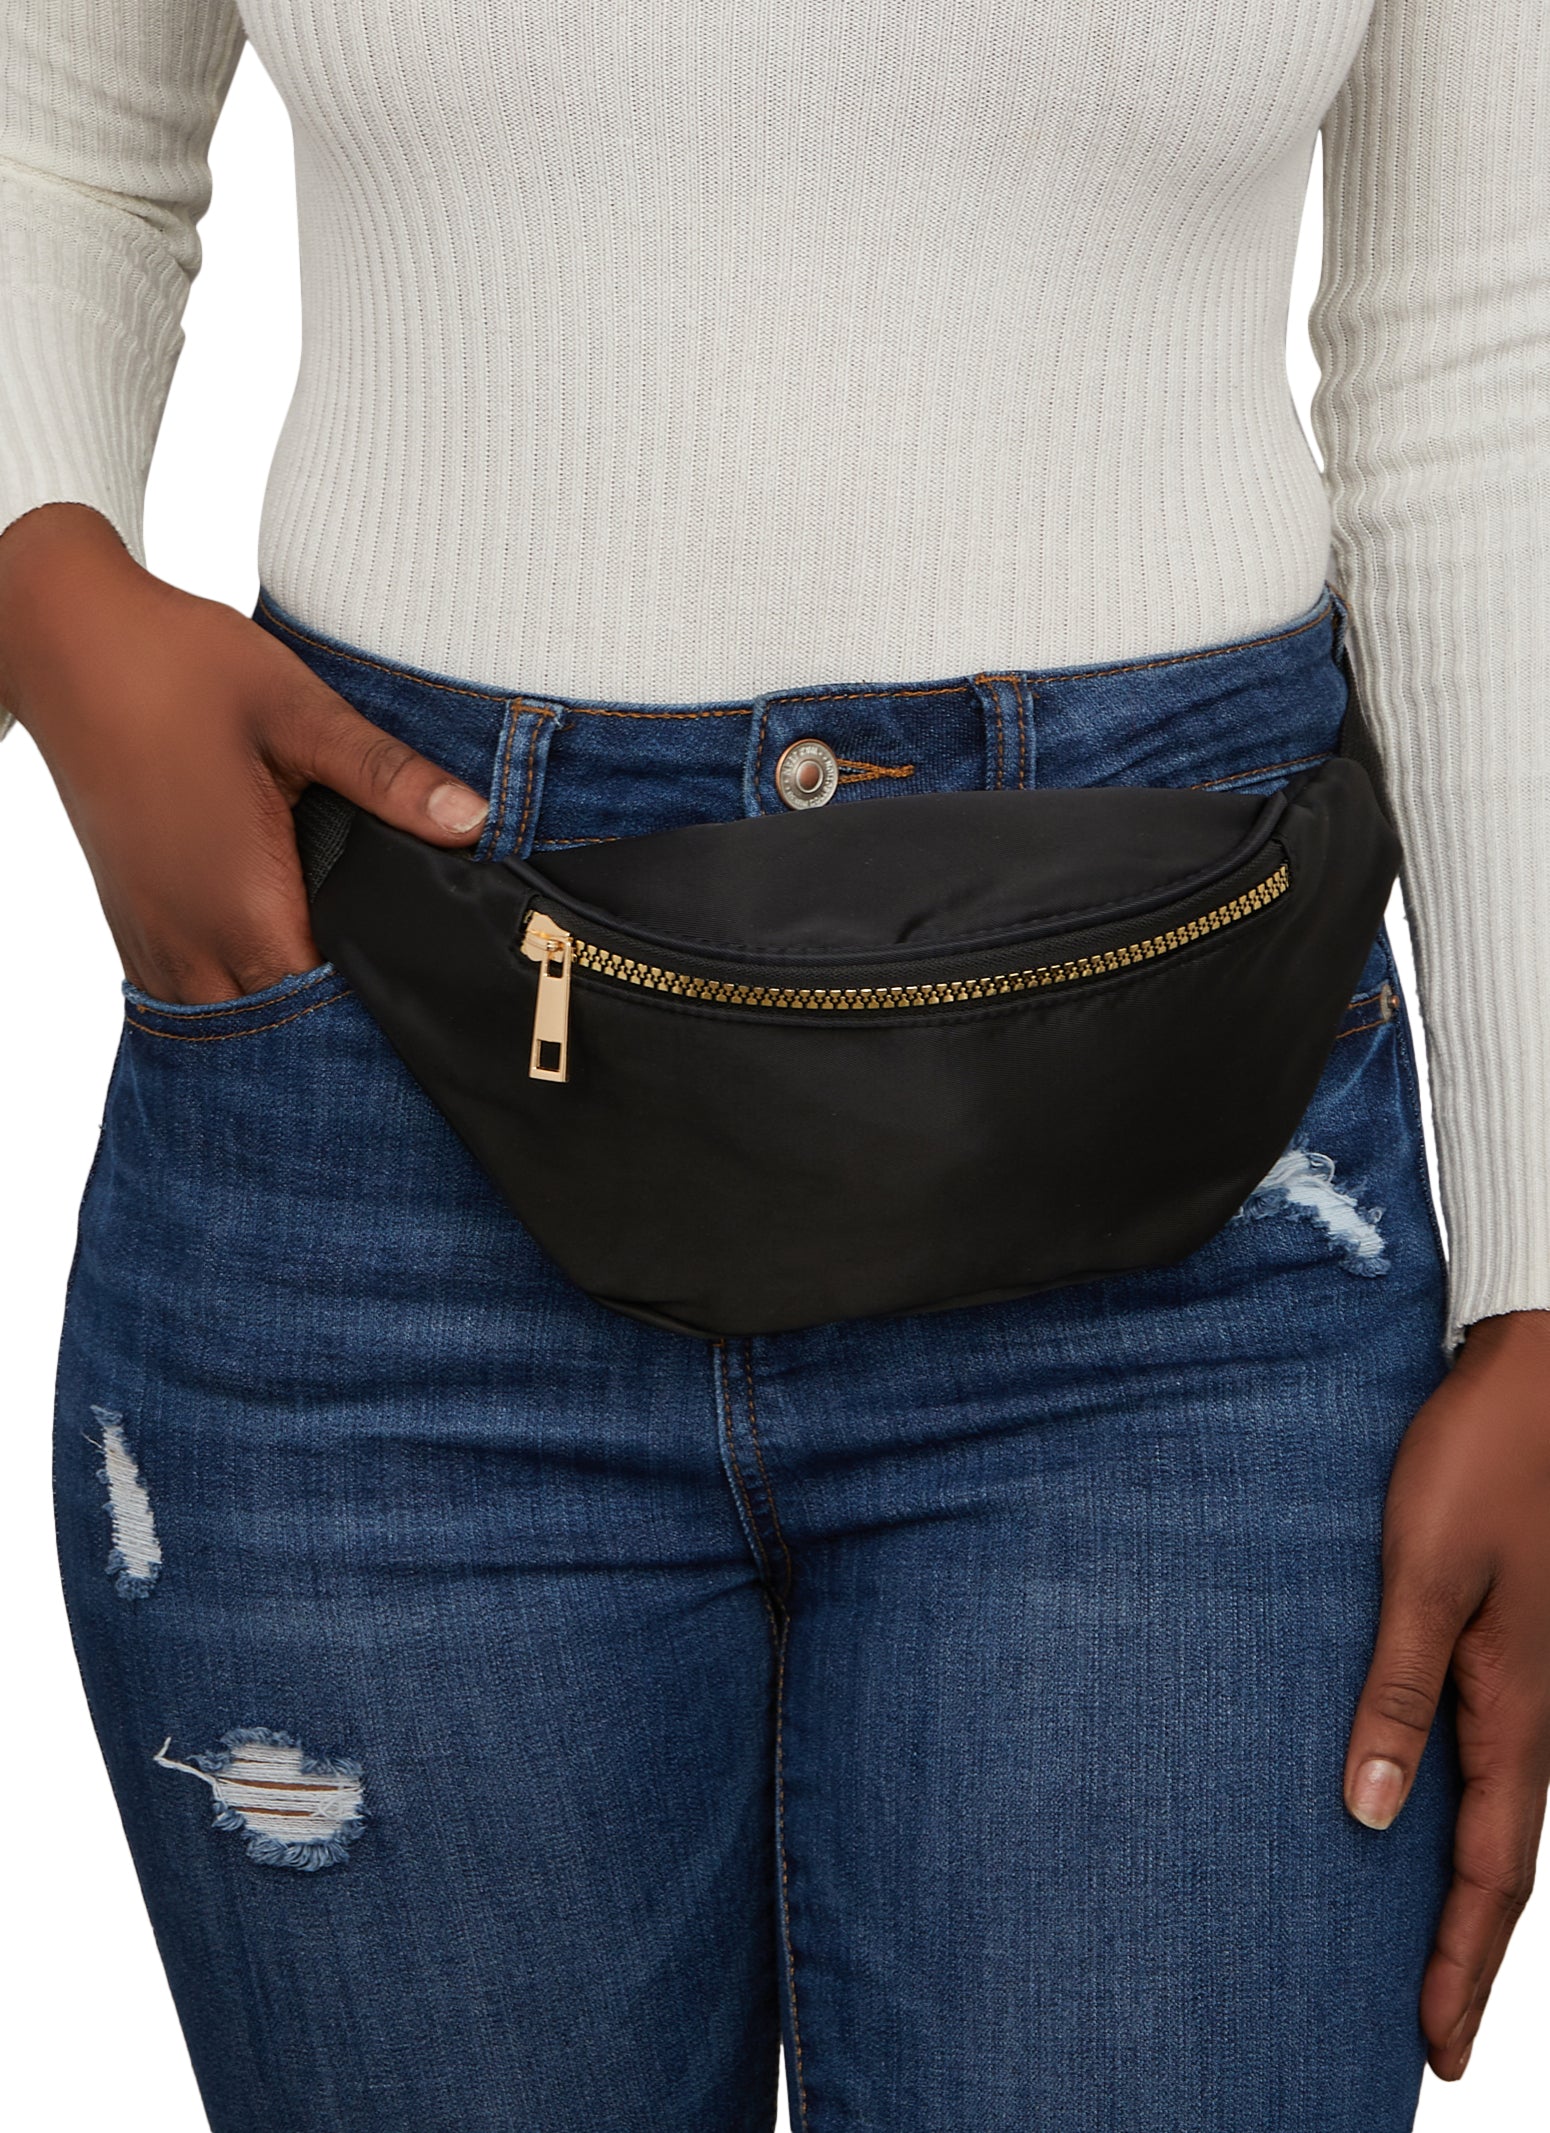 Where to Shop for a Plus Size Fanny Pack